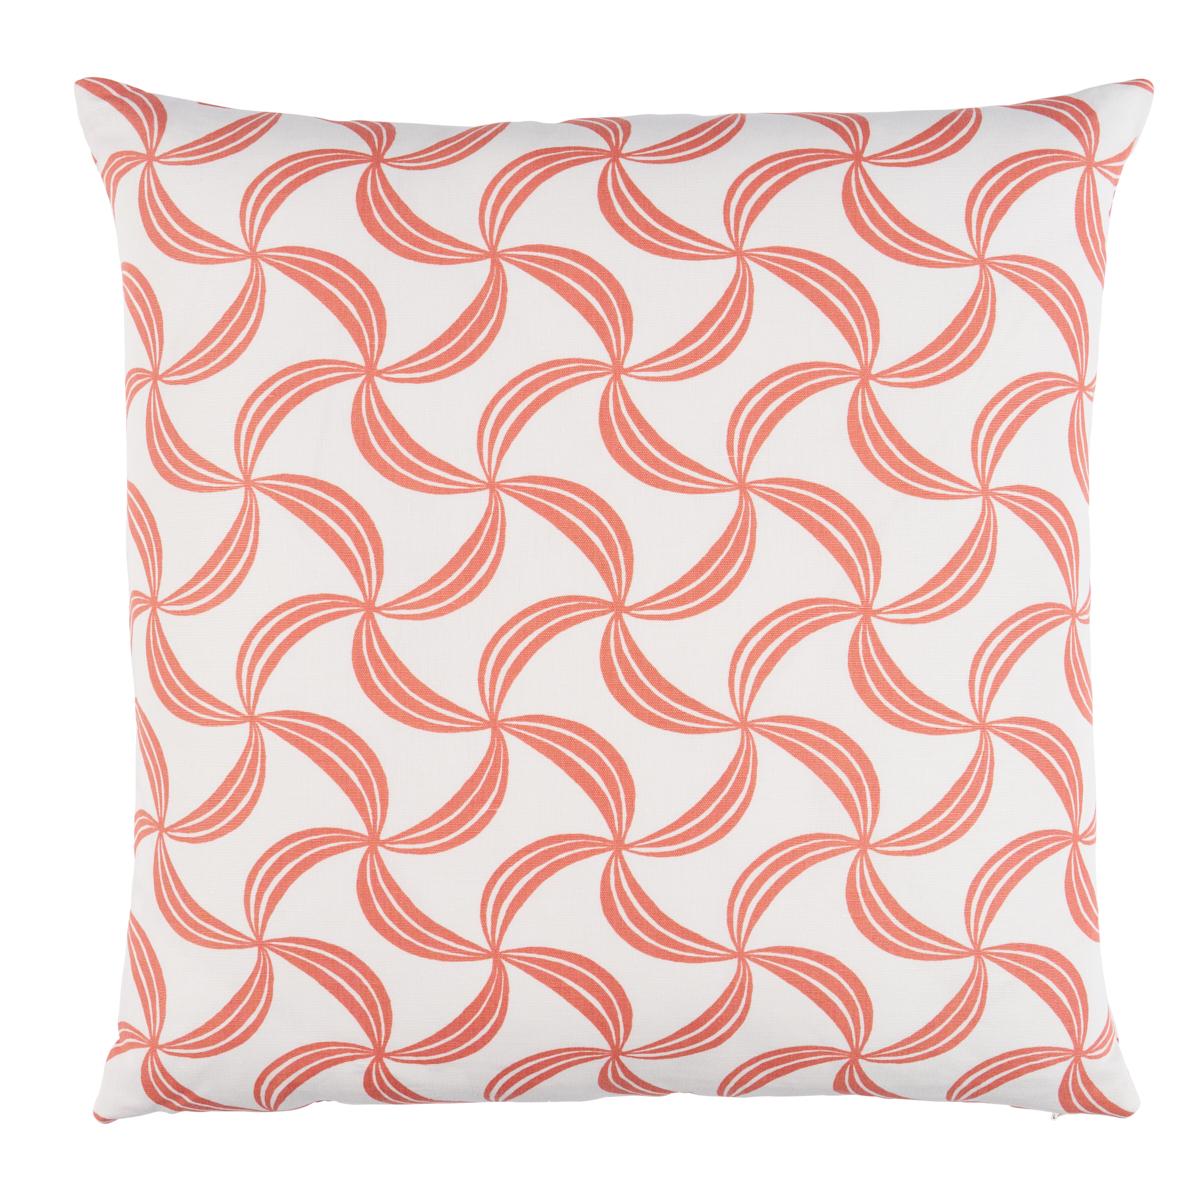 Ambrosia Pillow in Coral 20 x 20"